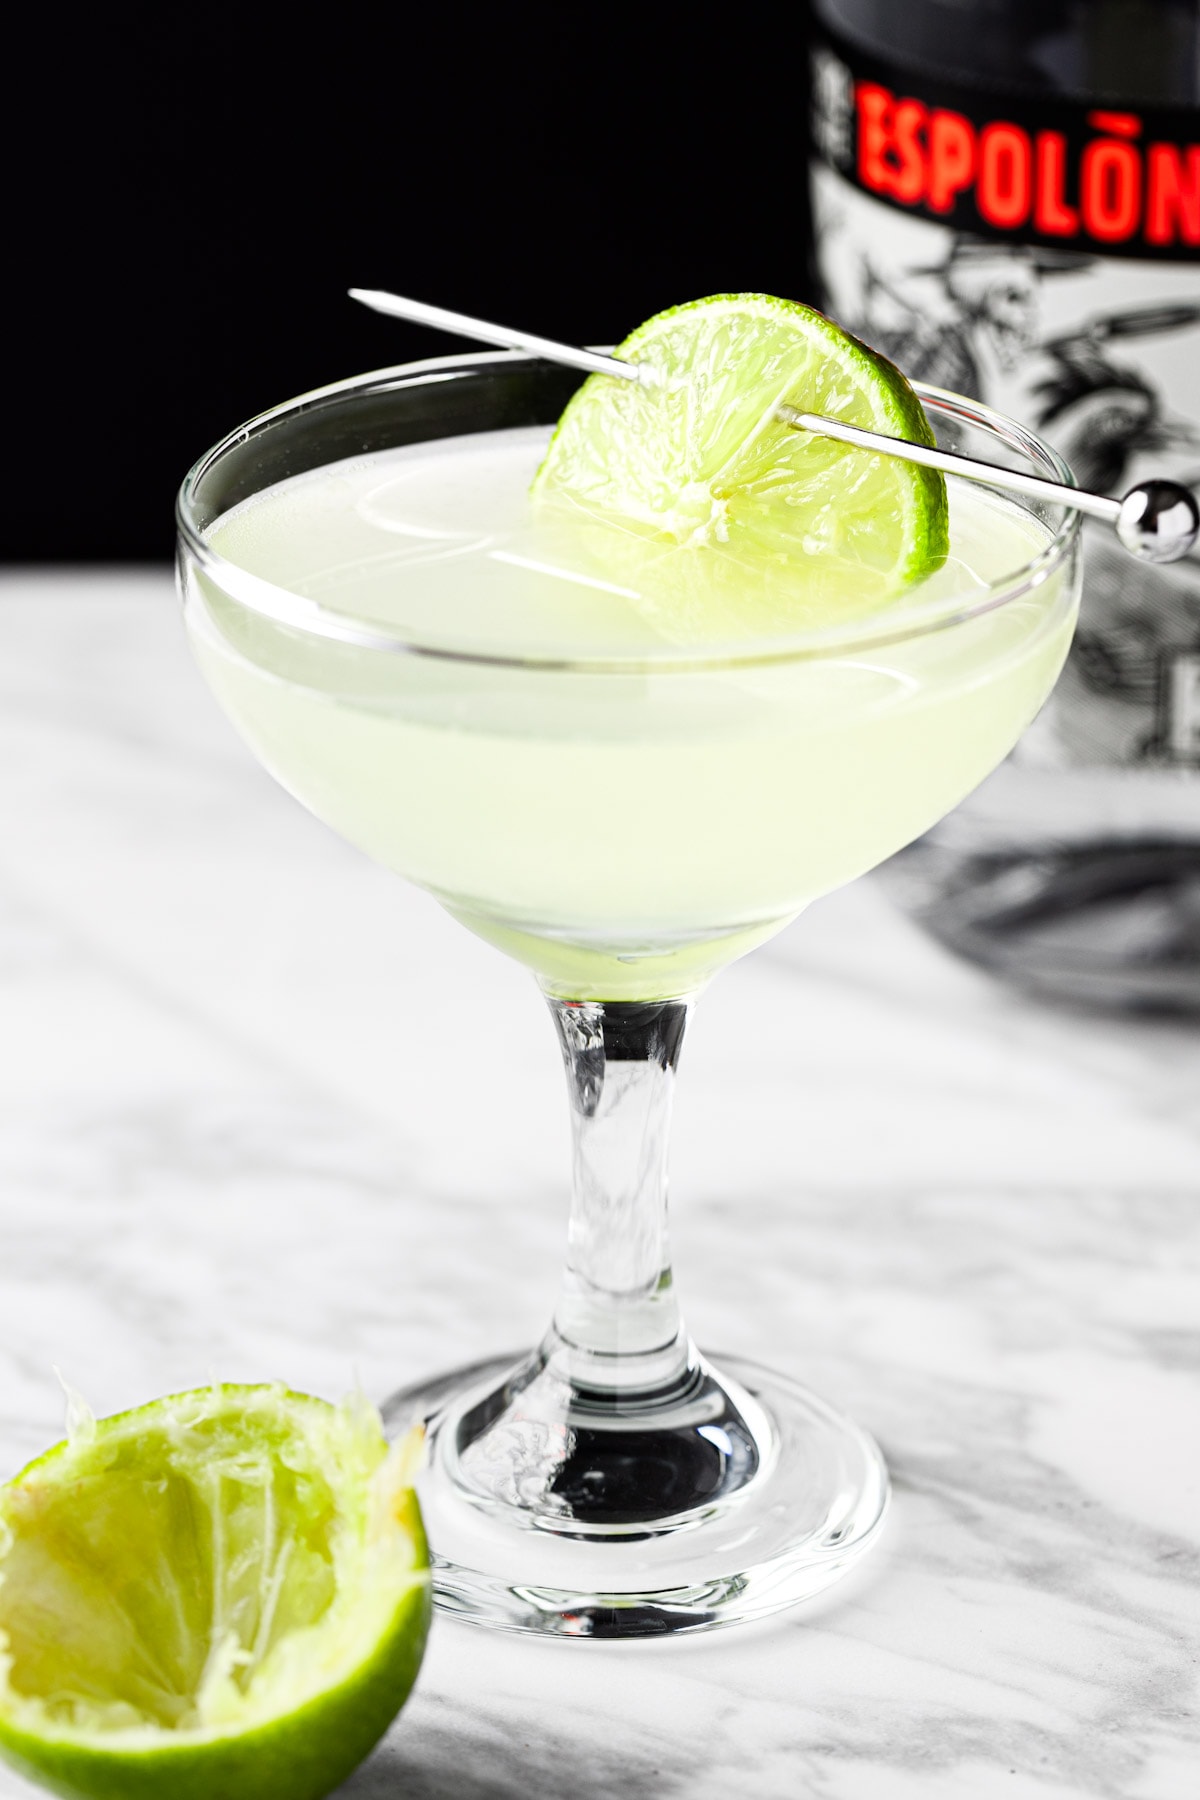 A tequila gimlet garnished with lime, with a bottle of tequila in the background.